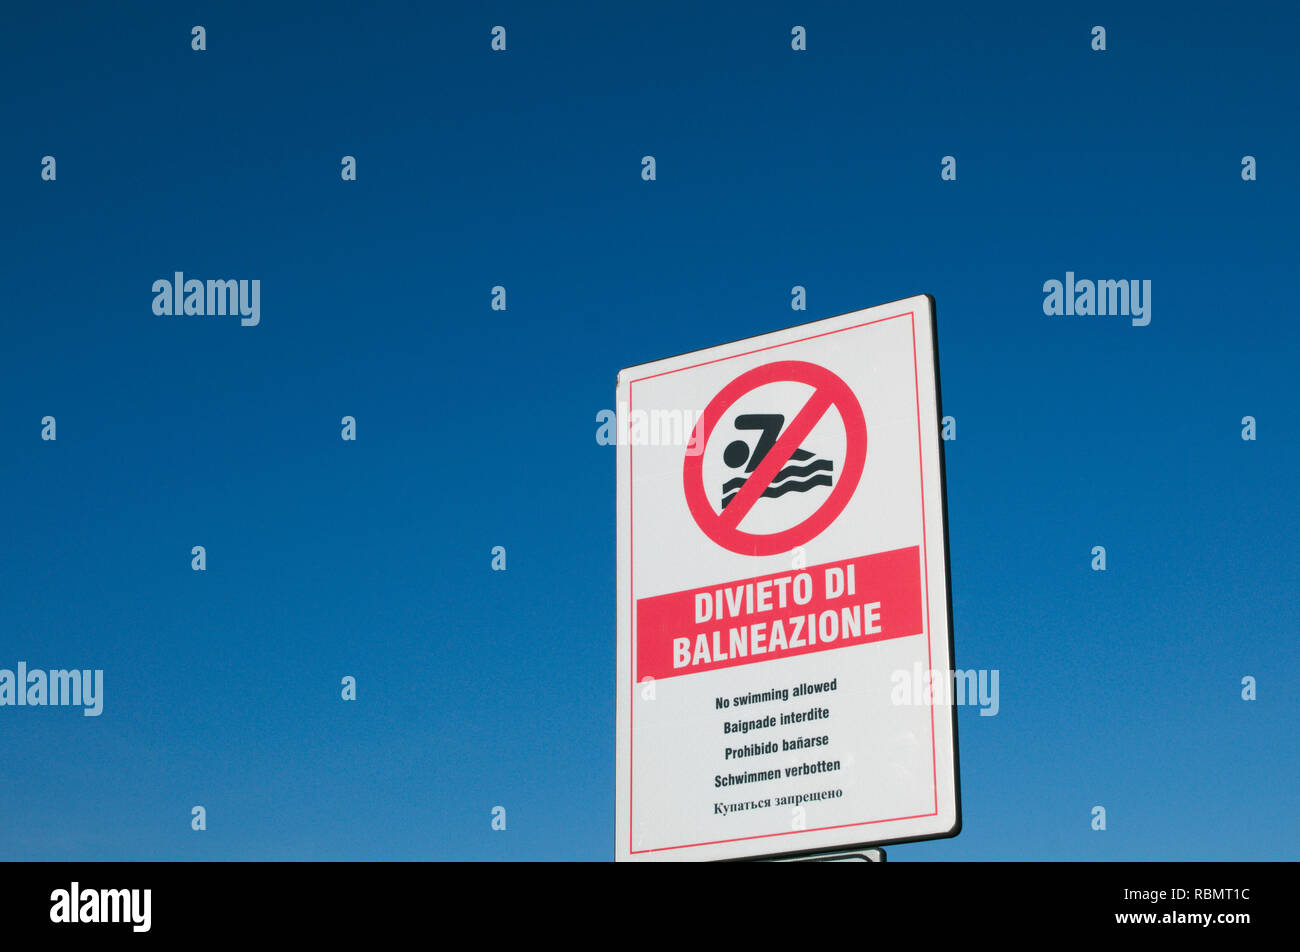 No swimming allowed sign in Italian Stock Photo